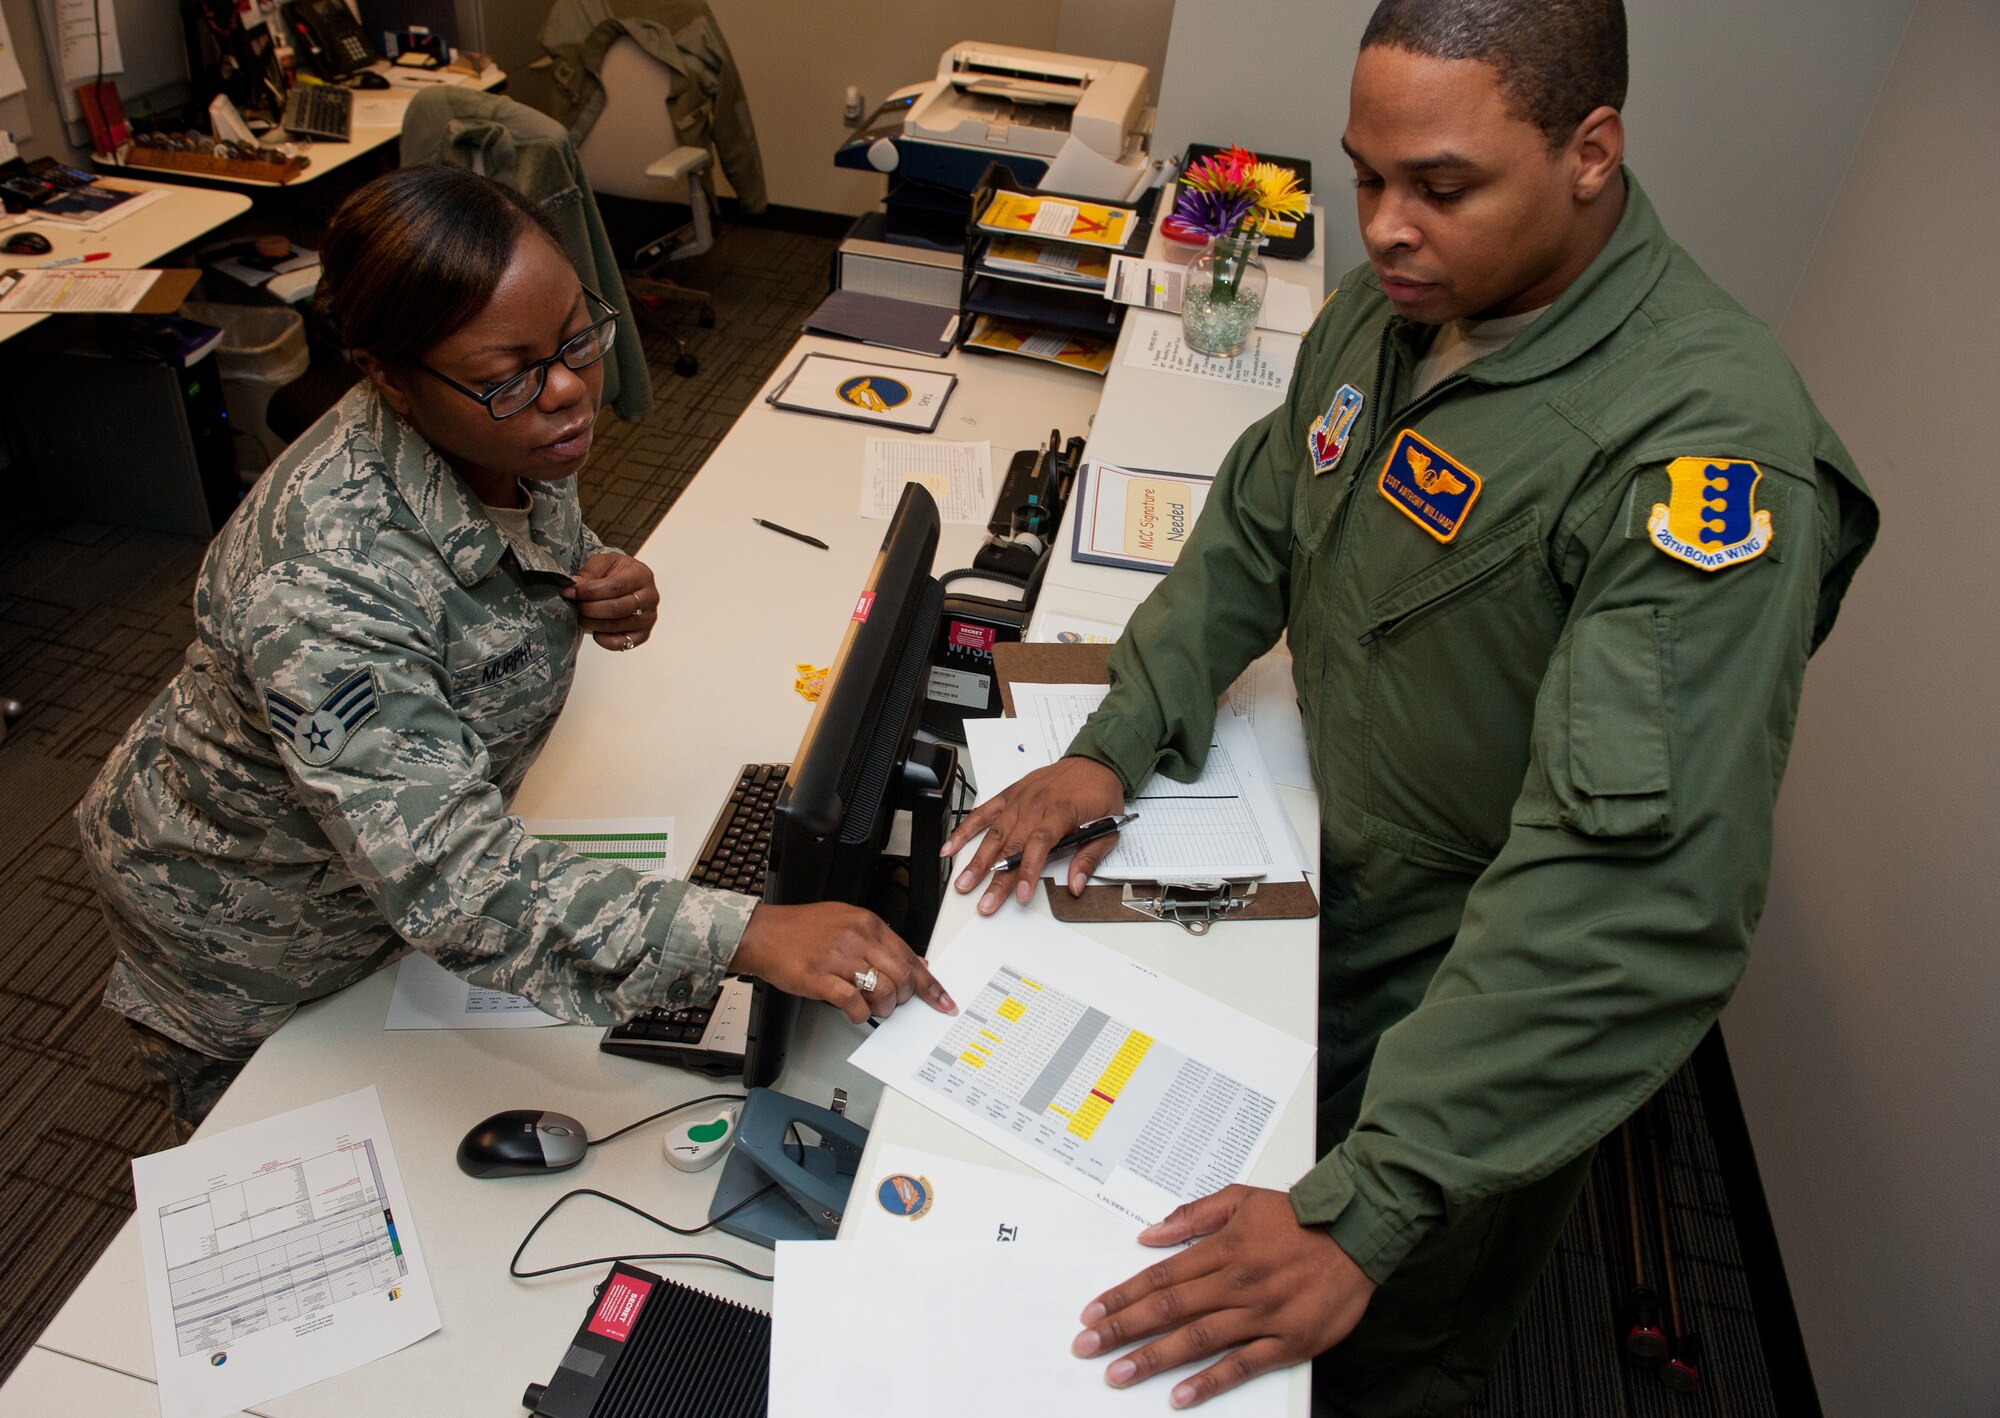 Senior Airman Alexandria Murphy, 432nd Attack Squadron aviation resource manager, reviews a flight record with Staff Sgt. Anthony Williams, 432nd ATKS sensor operator, in the SARM office on Ellsworth Air Force Base, S.D., Jan. 28, 2013. SARM Airmen create itineraries and track qualifications, training and flight records for aircrews at Ellsworth. (U.S. Air Force photo by Airman 1st Class Kate Thornton-Maurer/Released)